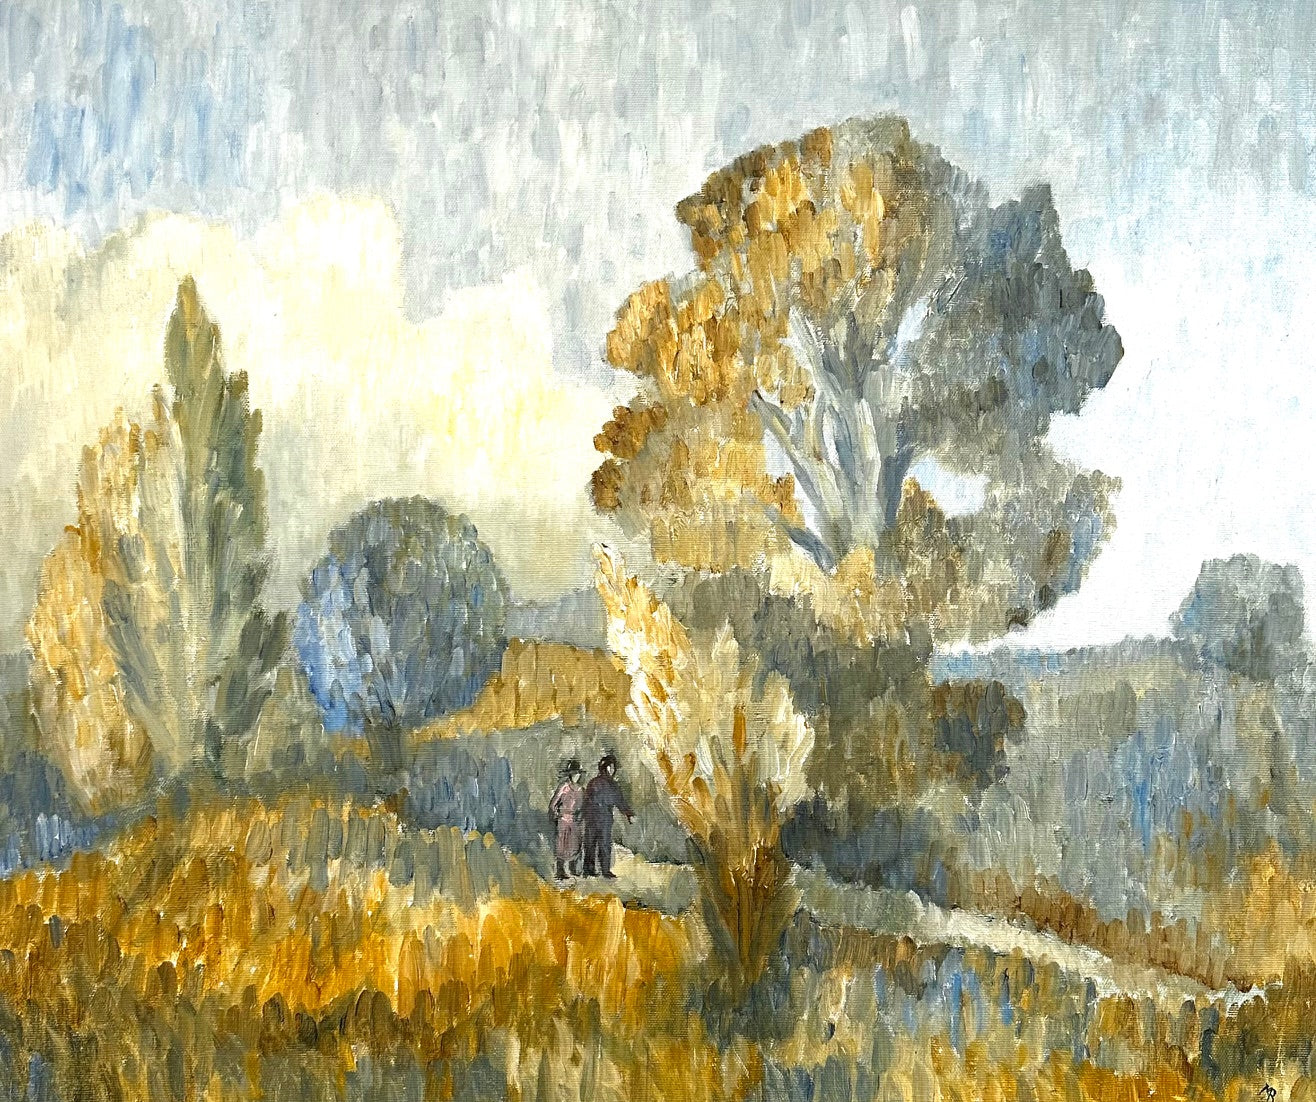 Anonymous, Figures in a Landscape